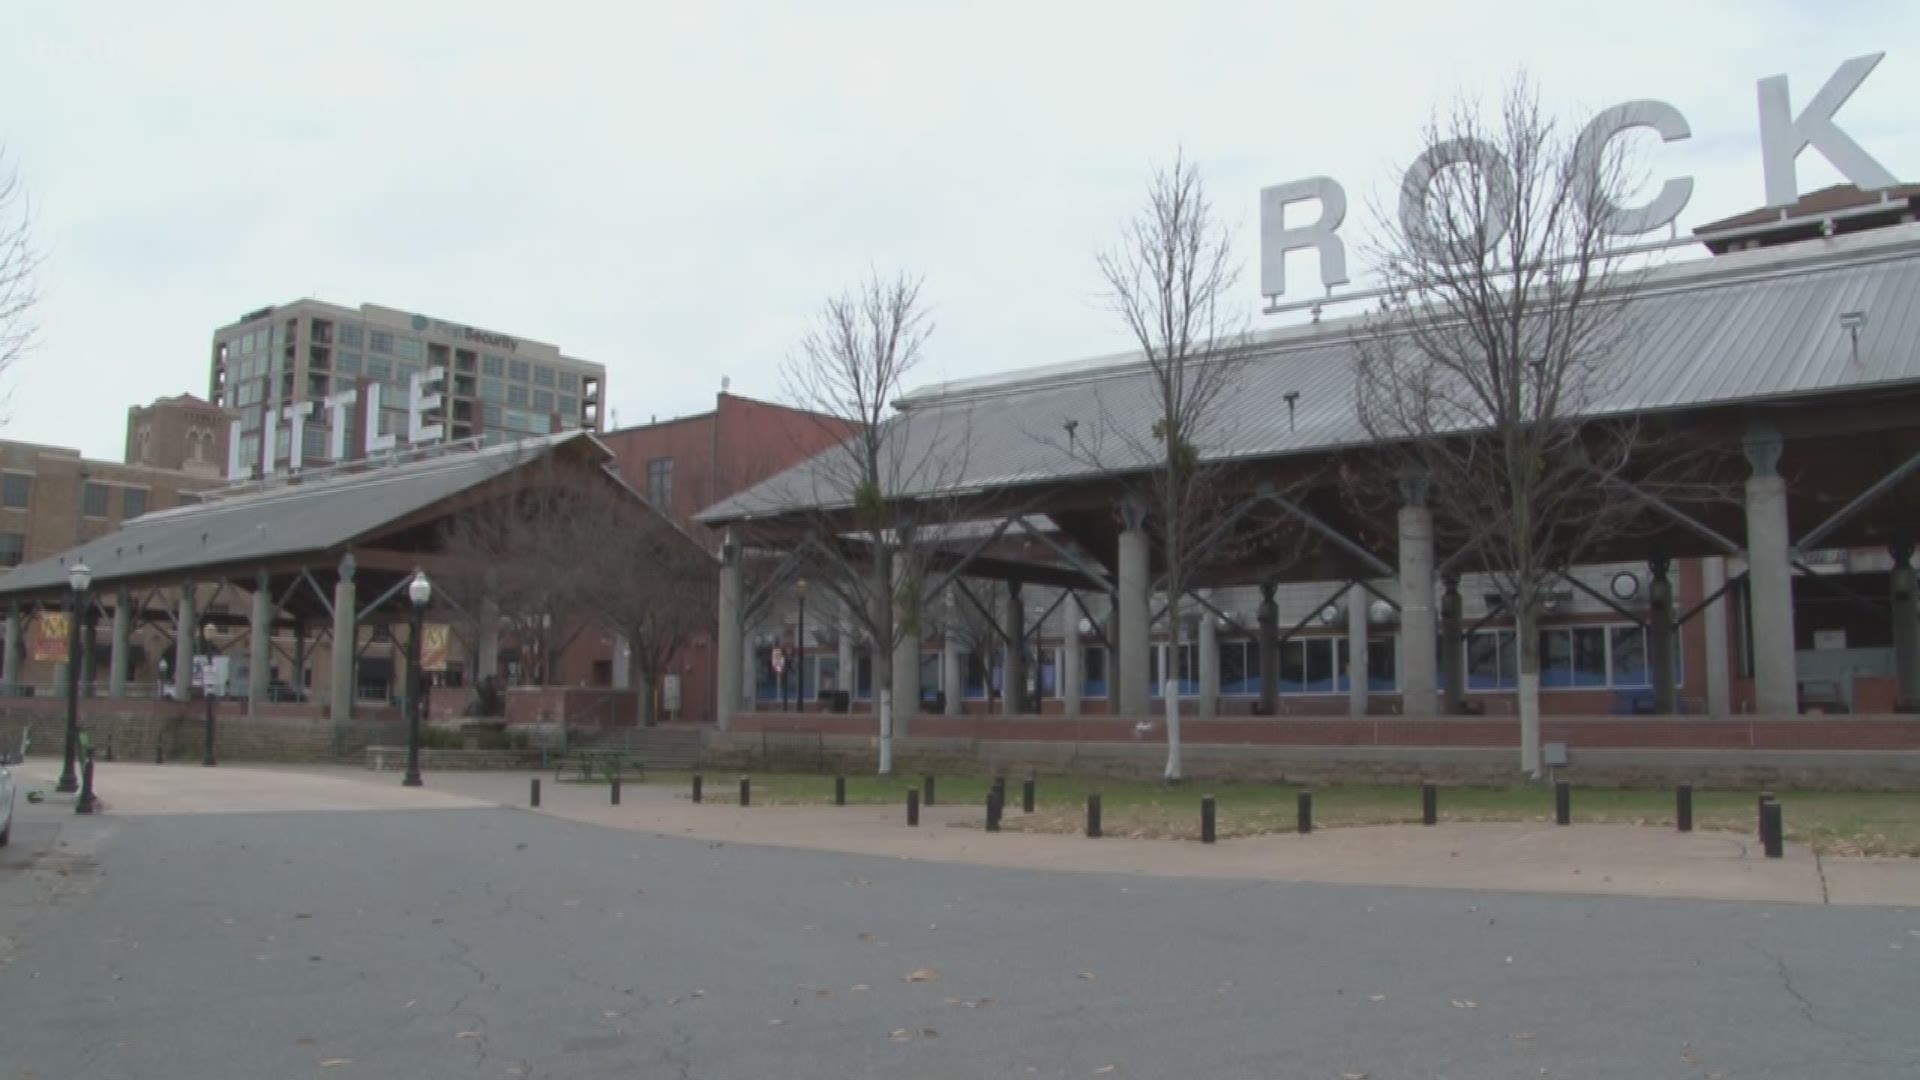 Just months after launching an Entertainment District, the Little Rock River Market has more plans in the works.